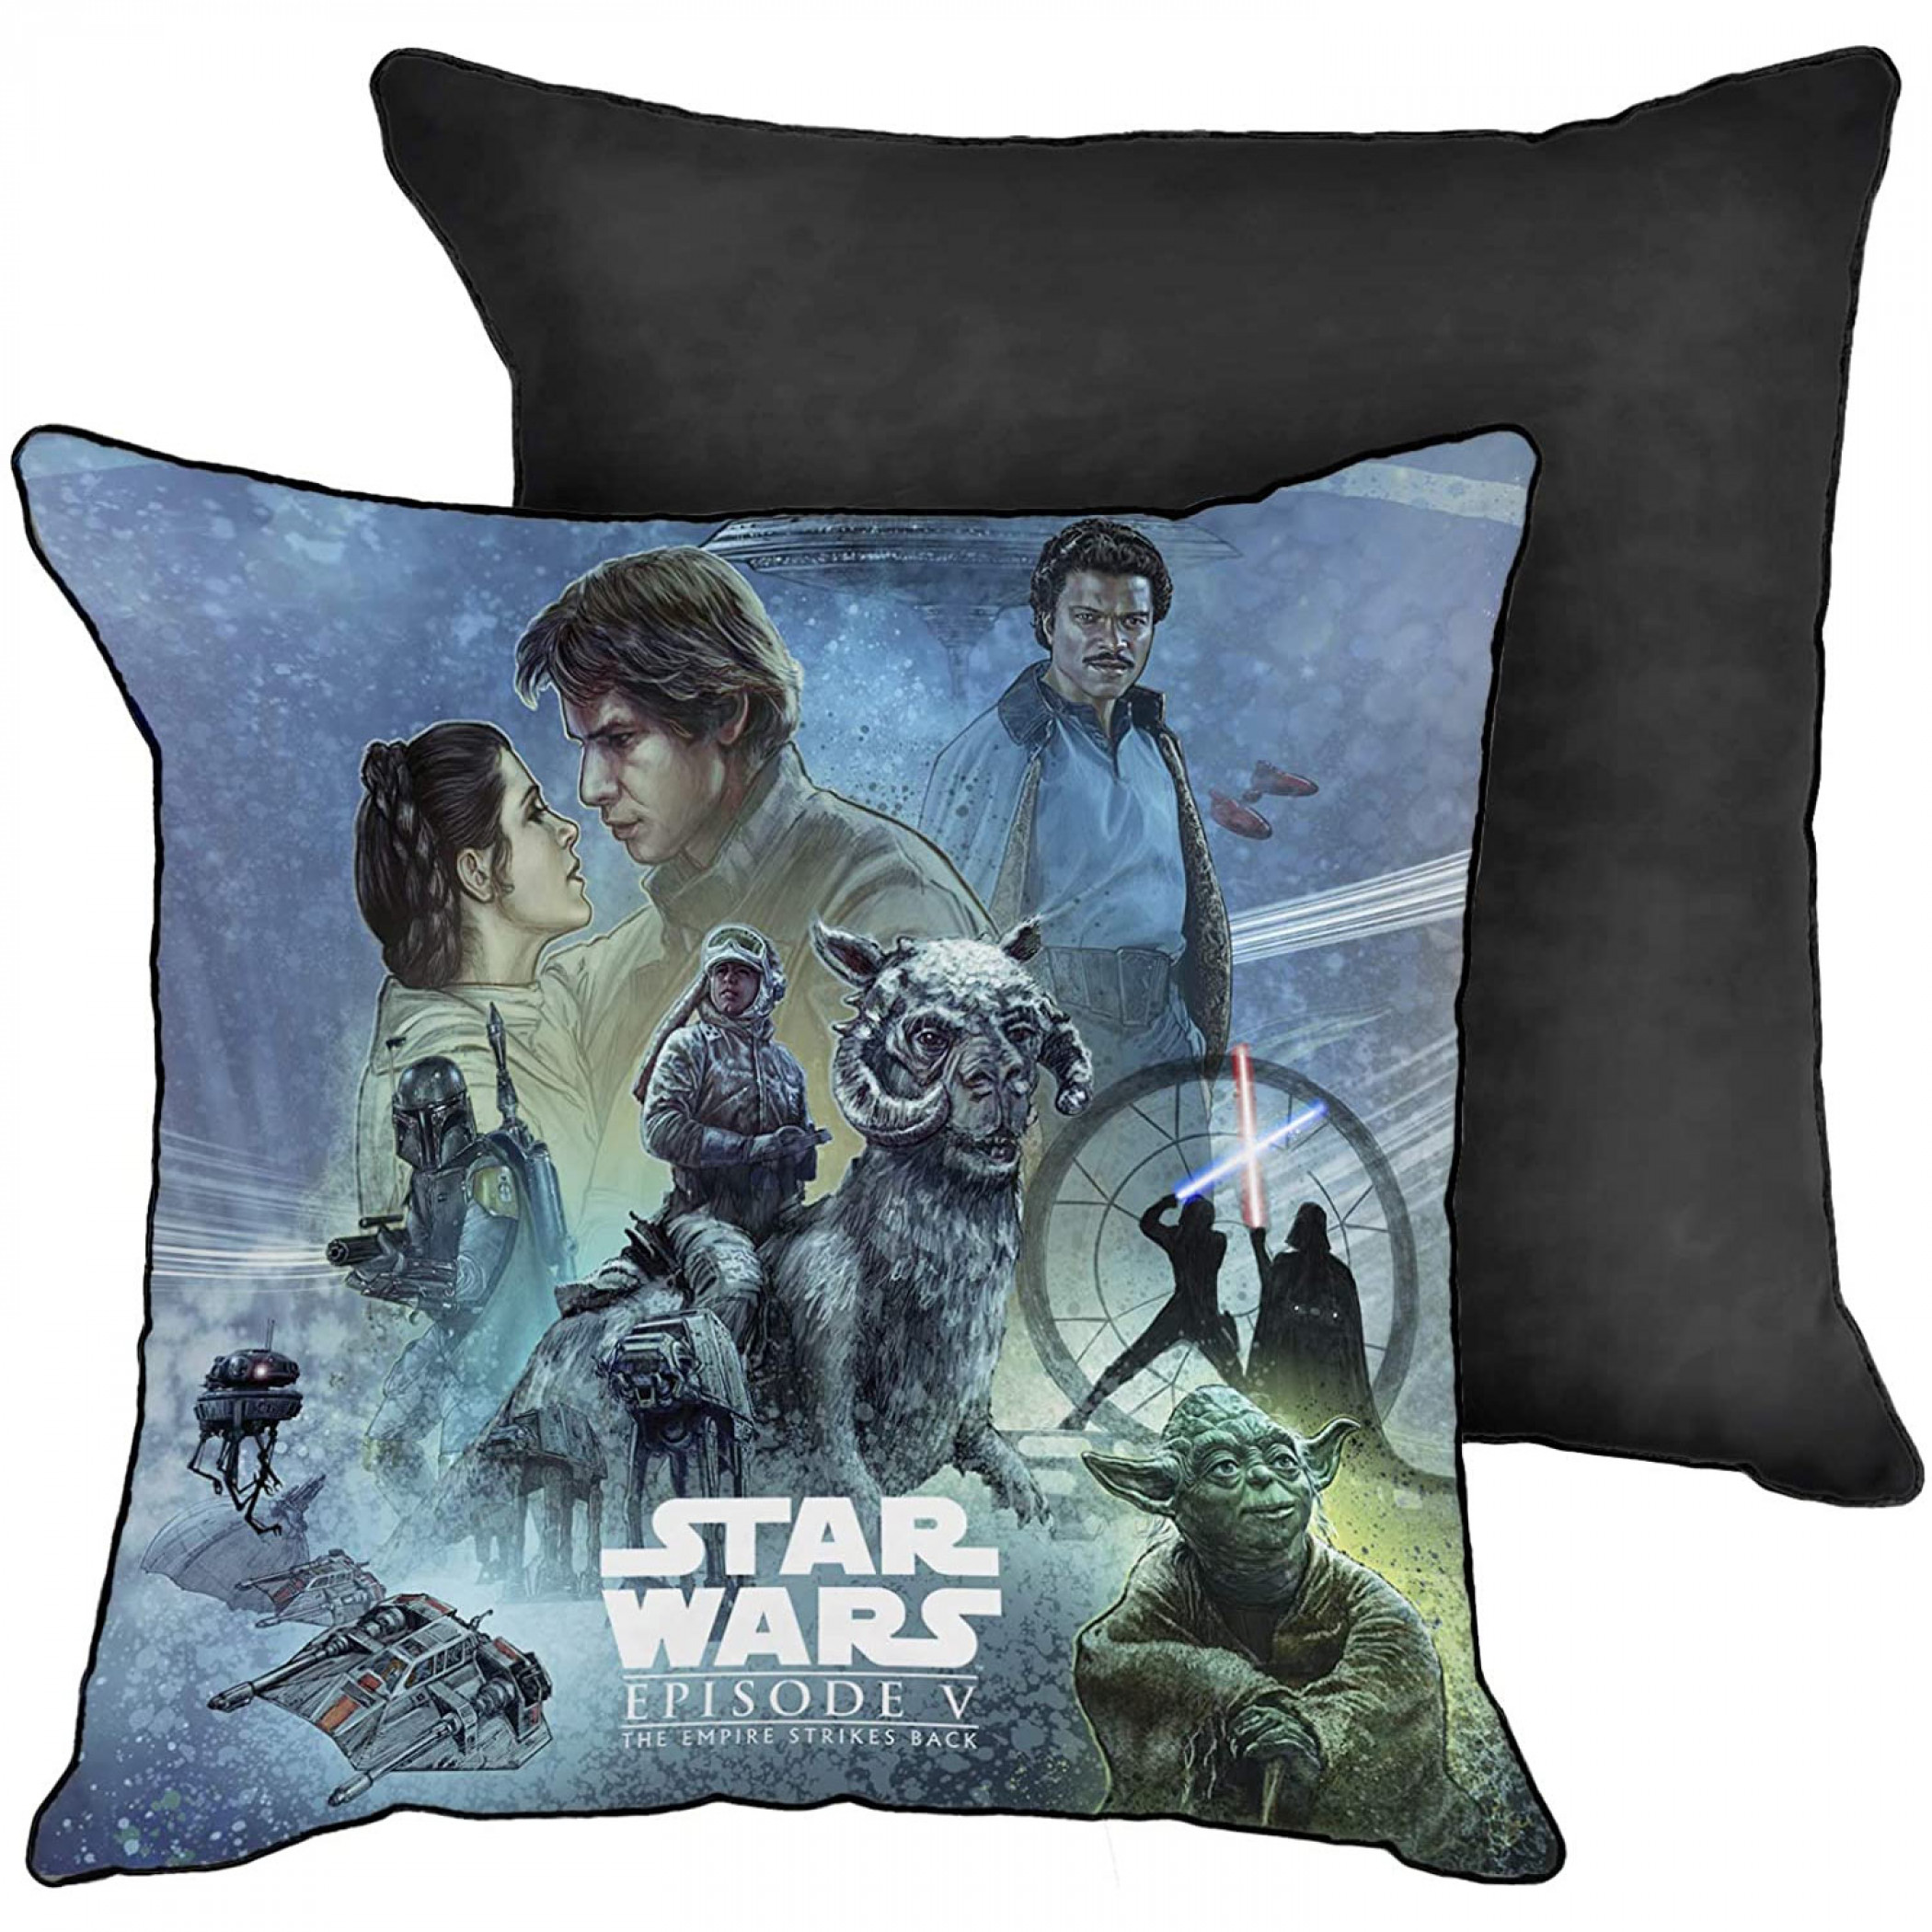 Star Wars Empire Strikes Back Decorative Pillow Cover